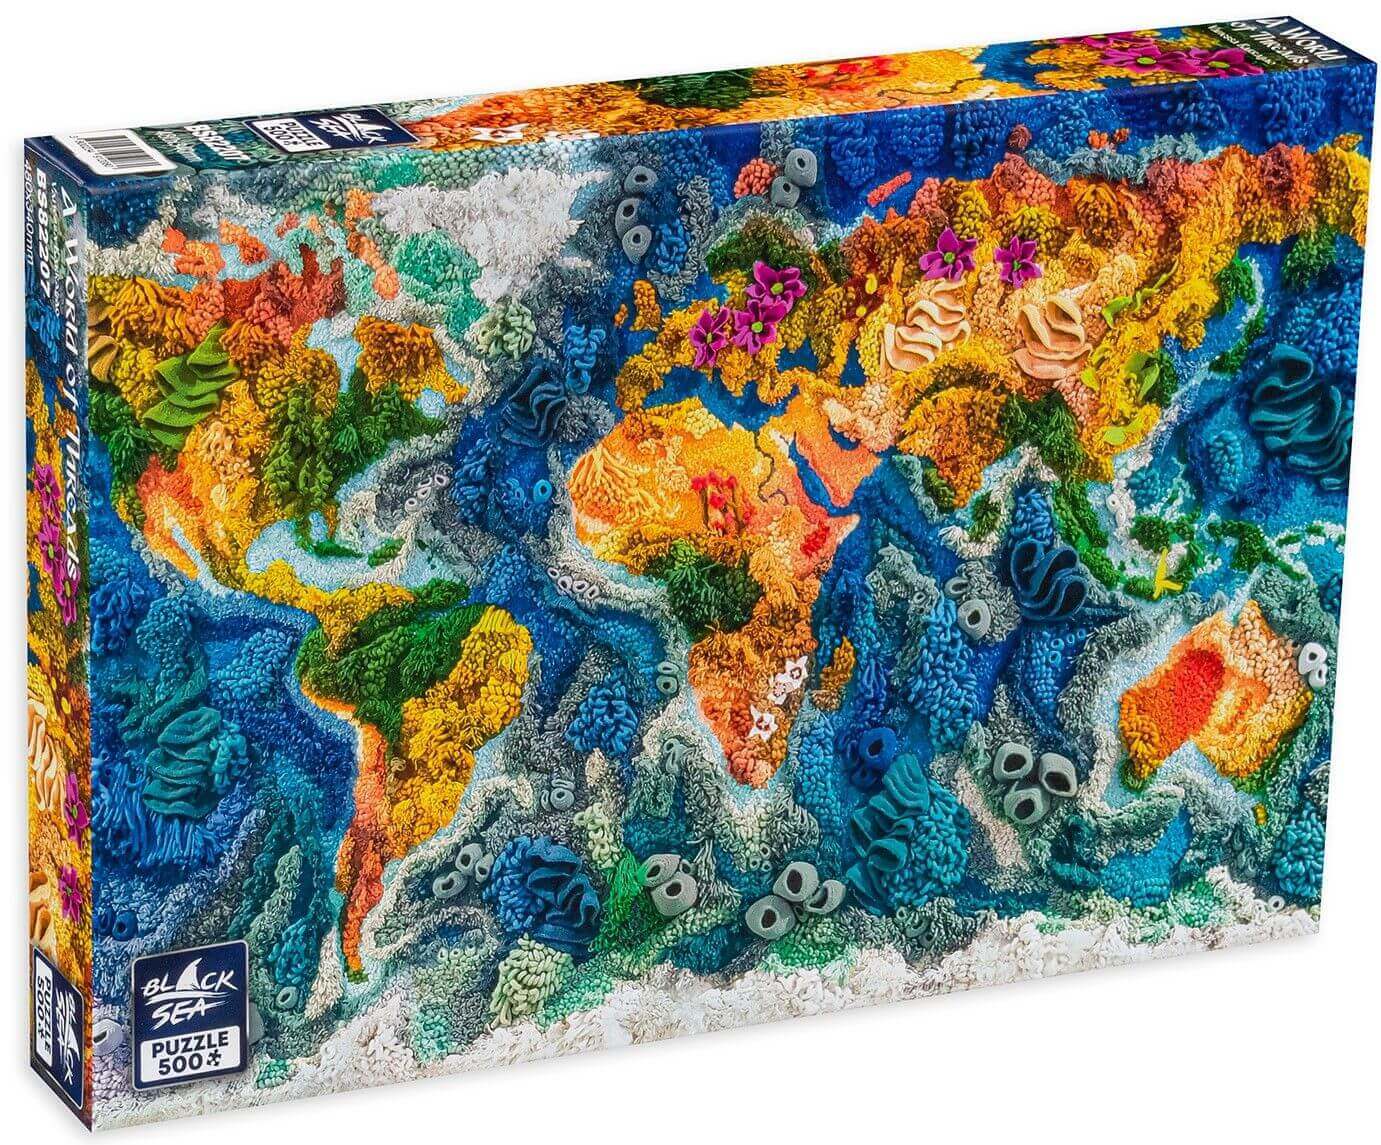 Puzzle Black Sea 500 pieces - A World of Threads, -